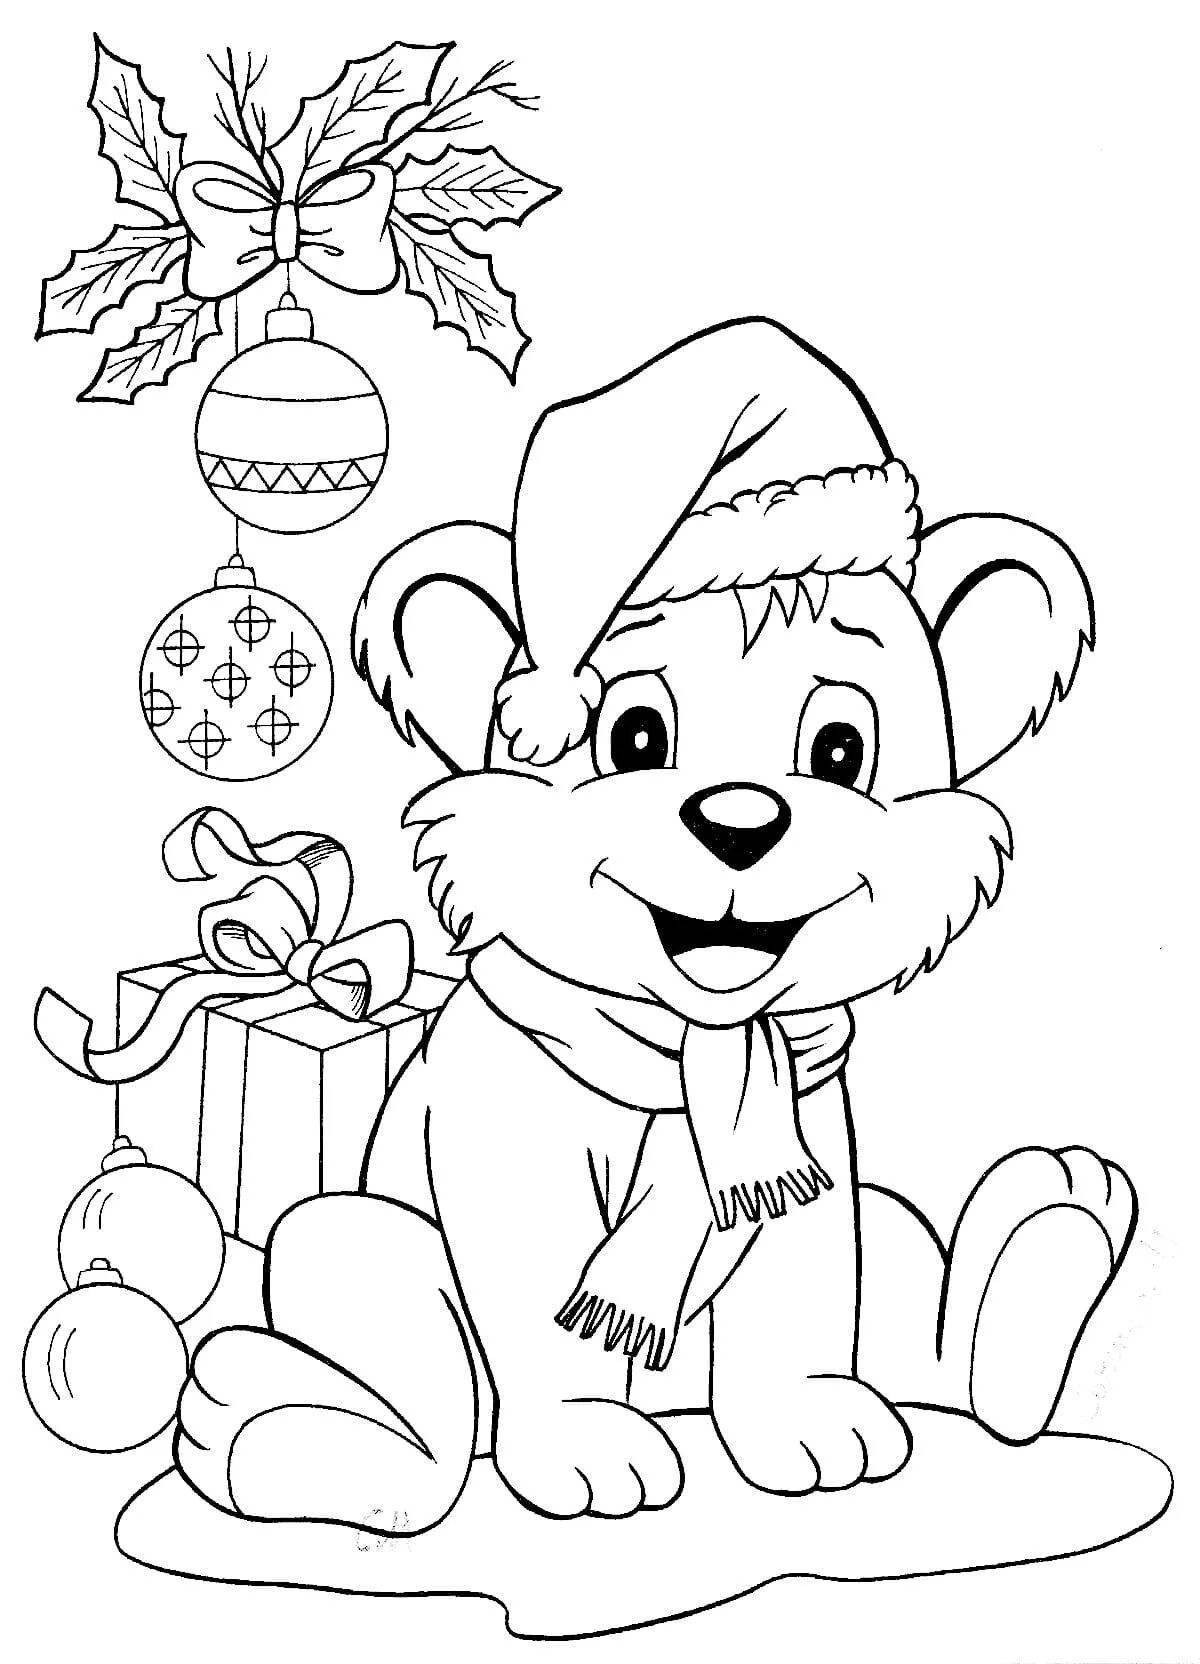 Deluxe Christmas coloring book